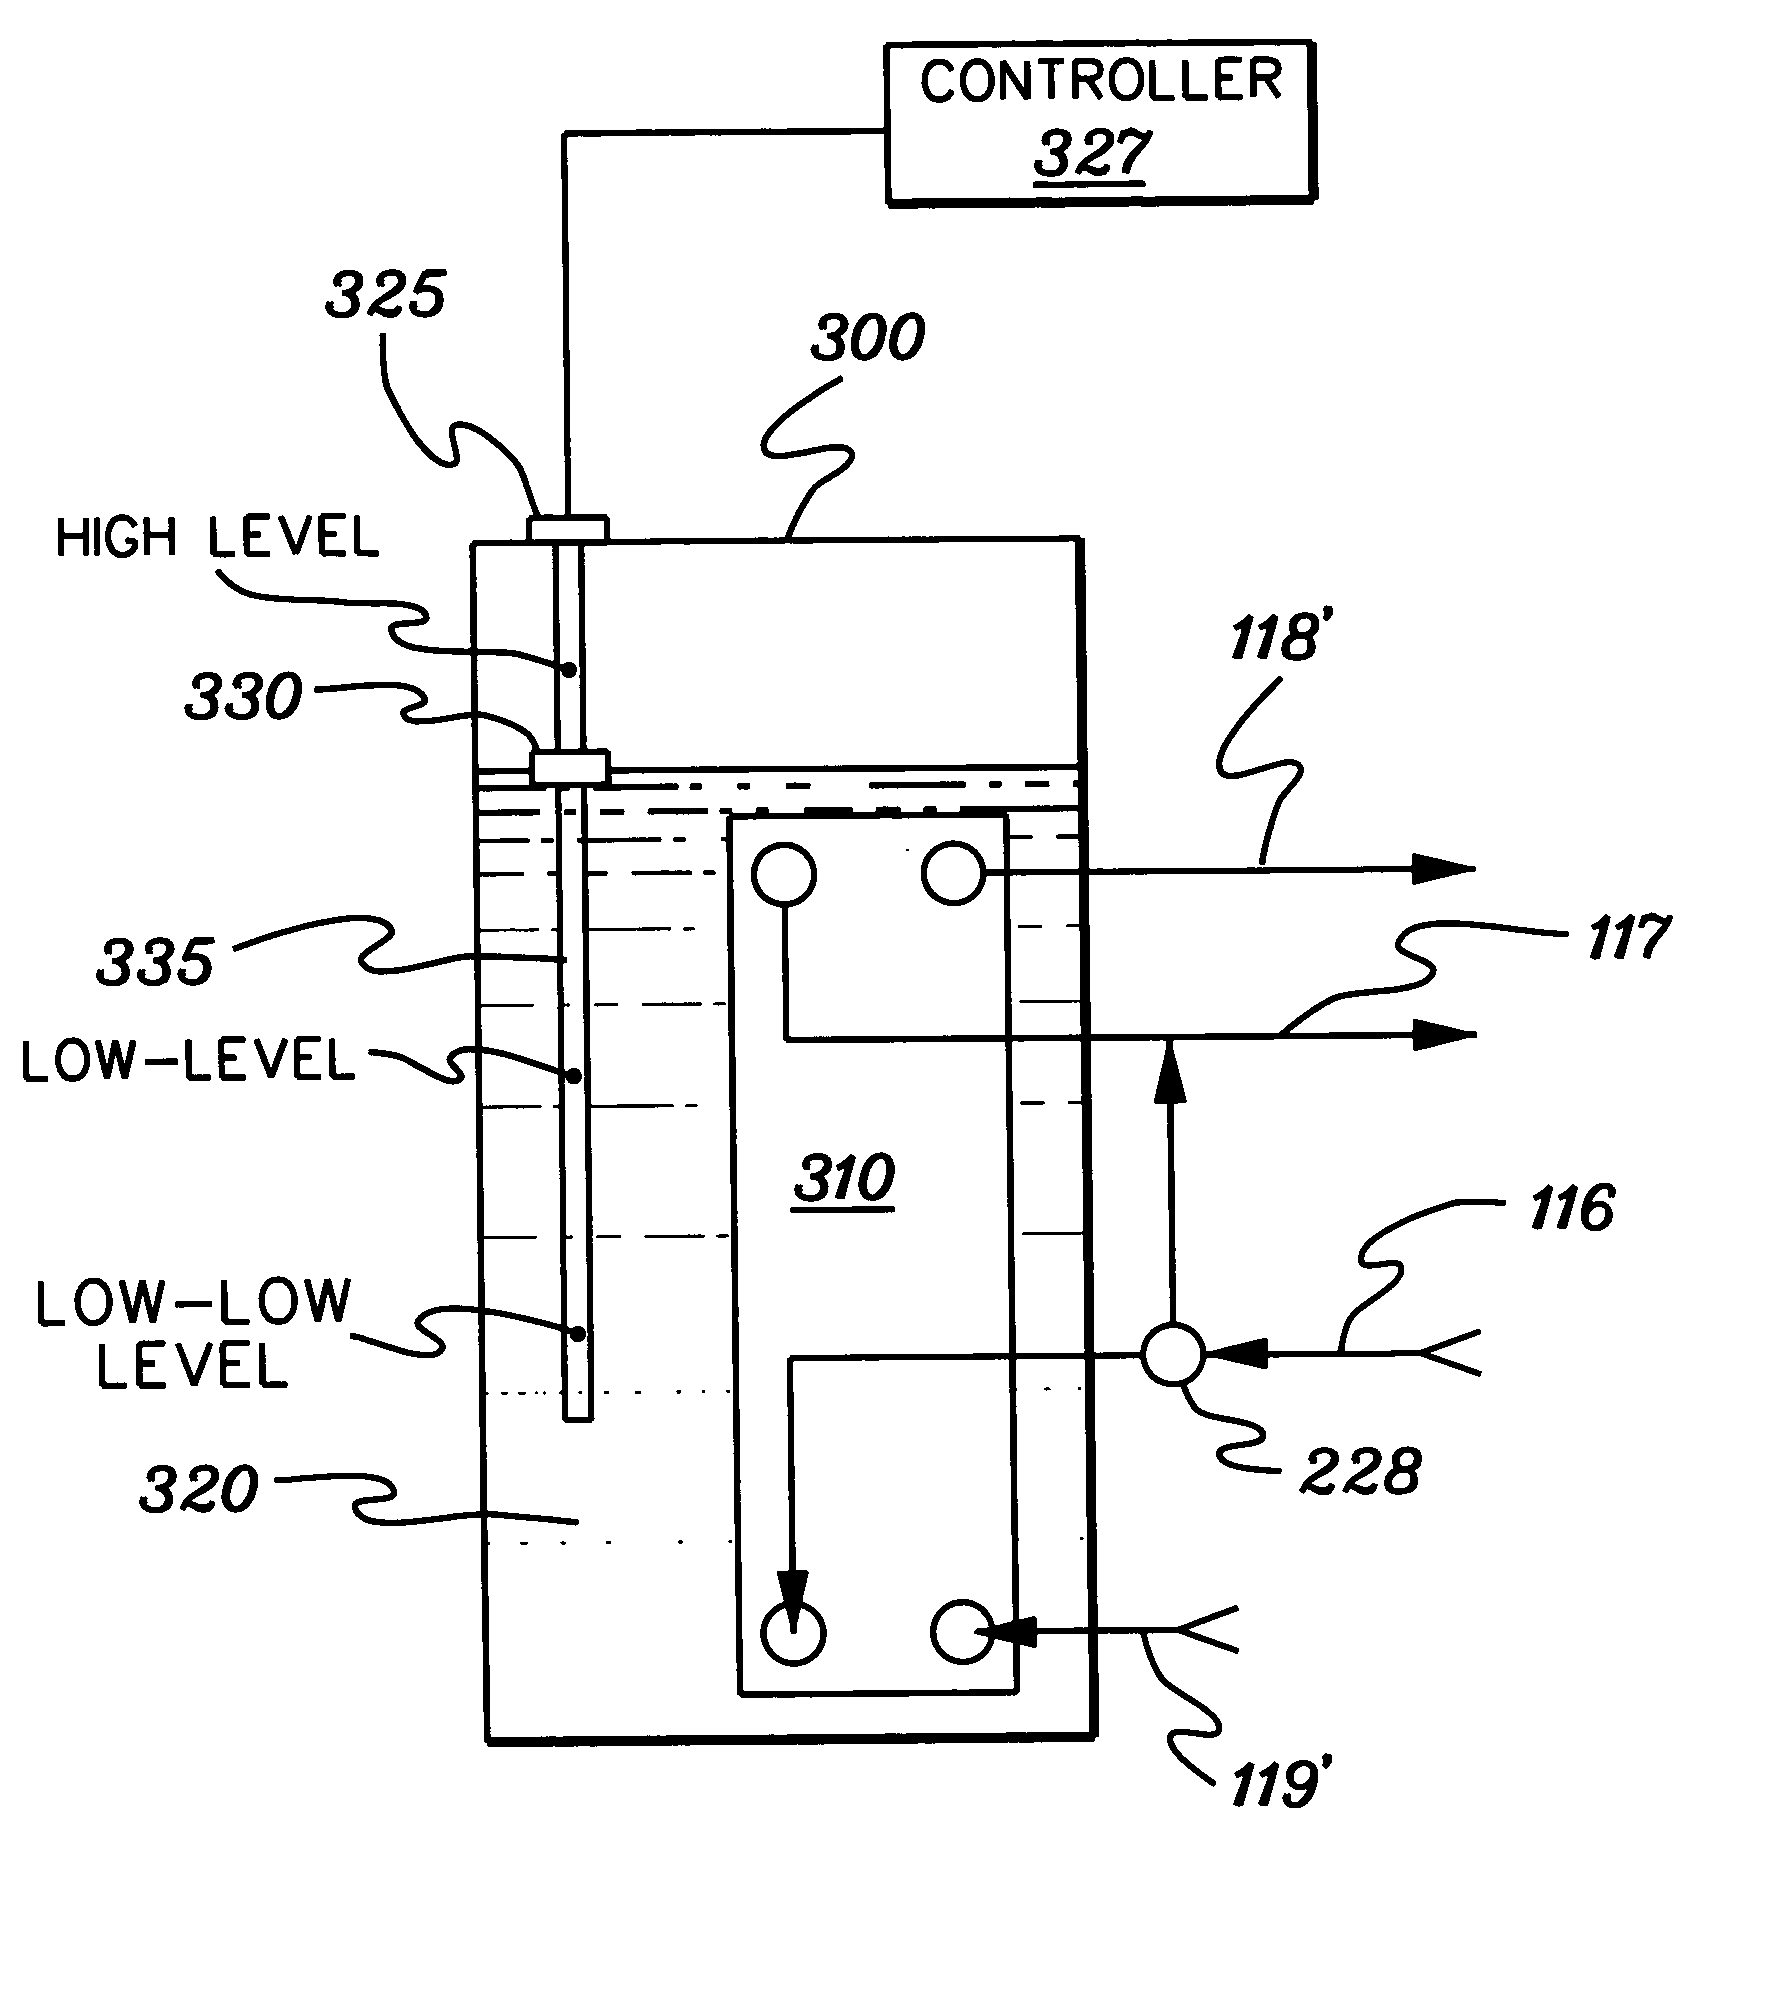 Method, system and program product for monitoring rate of volume change of coolant within a cooling system